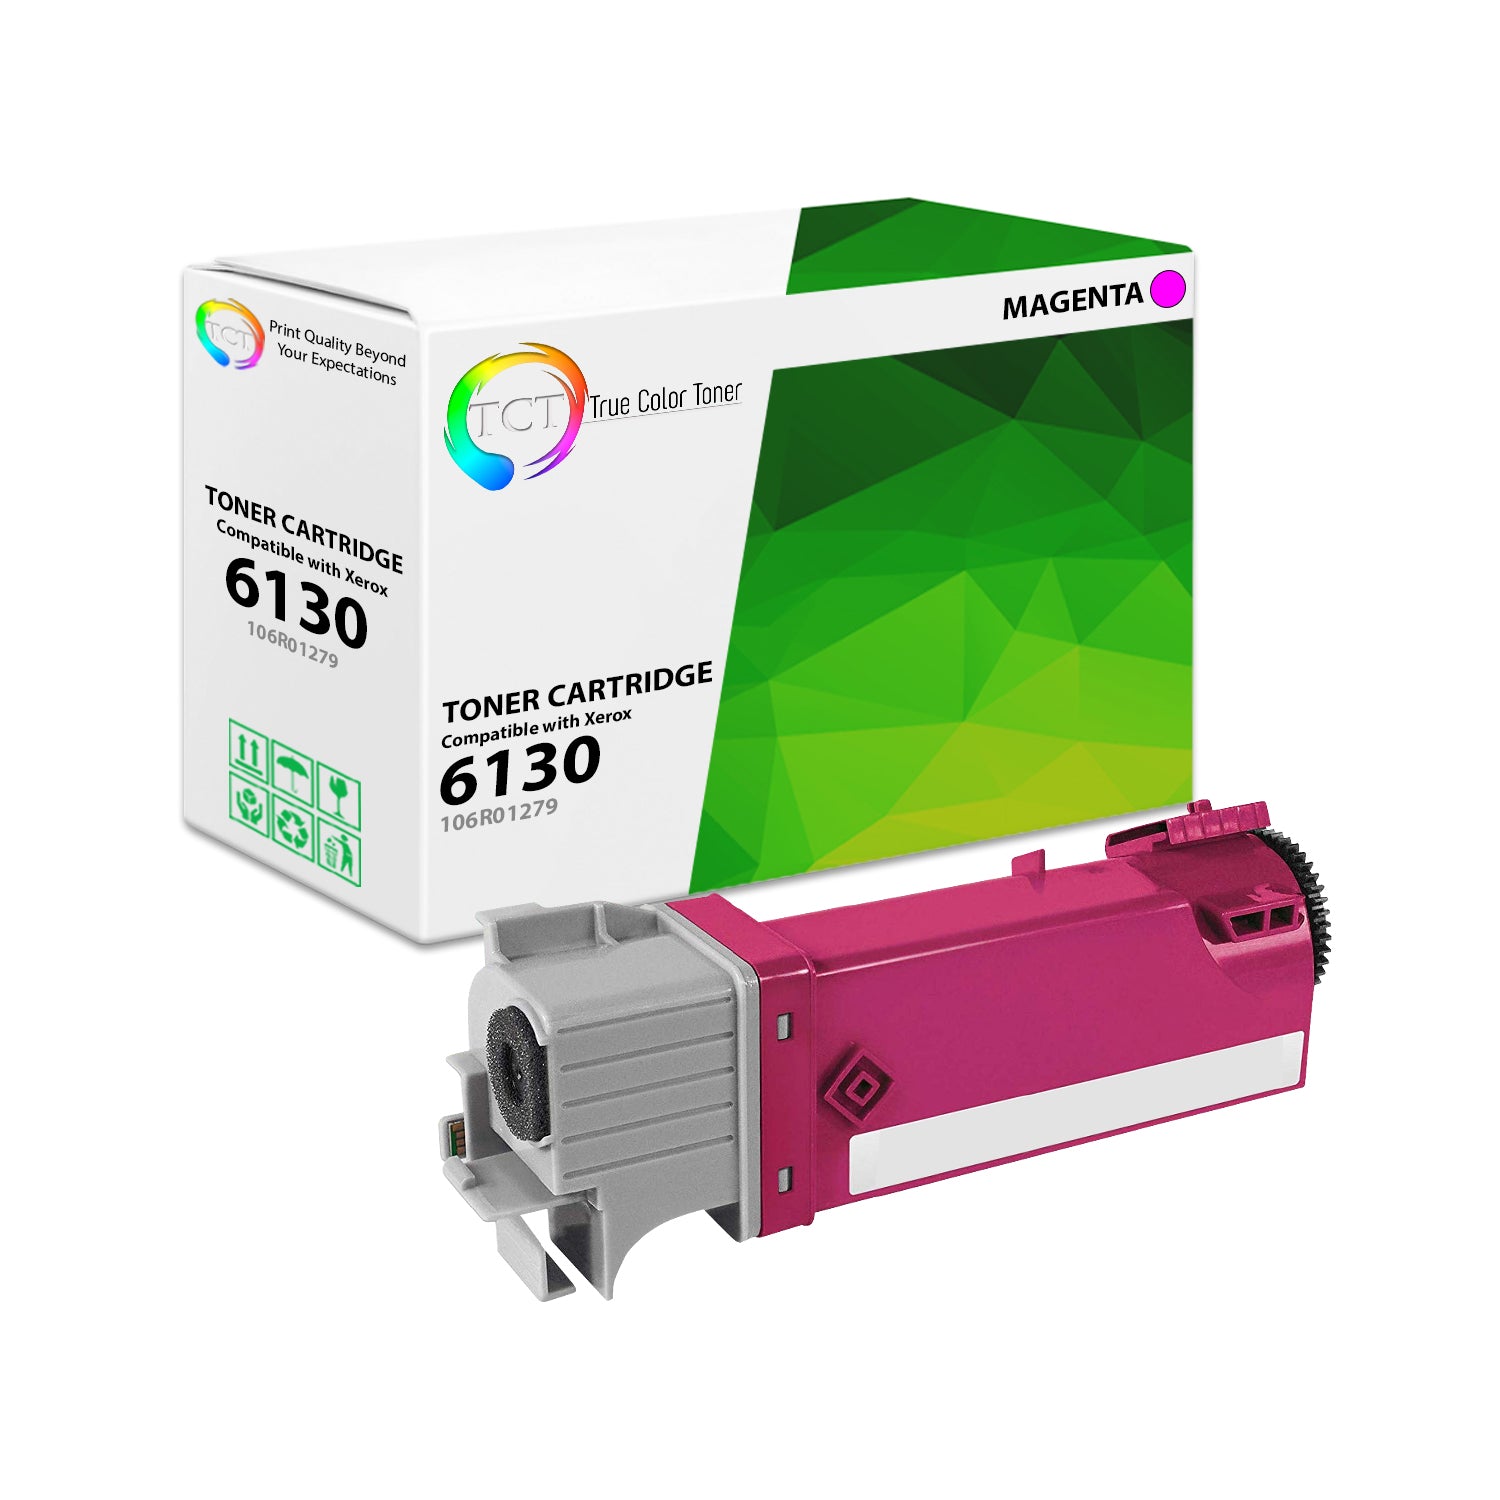 TCT Compatible Toner Cartridge Replacement for the Xerox 6130 Series - 1 Pack Magenta